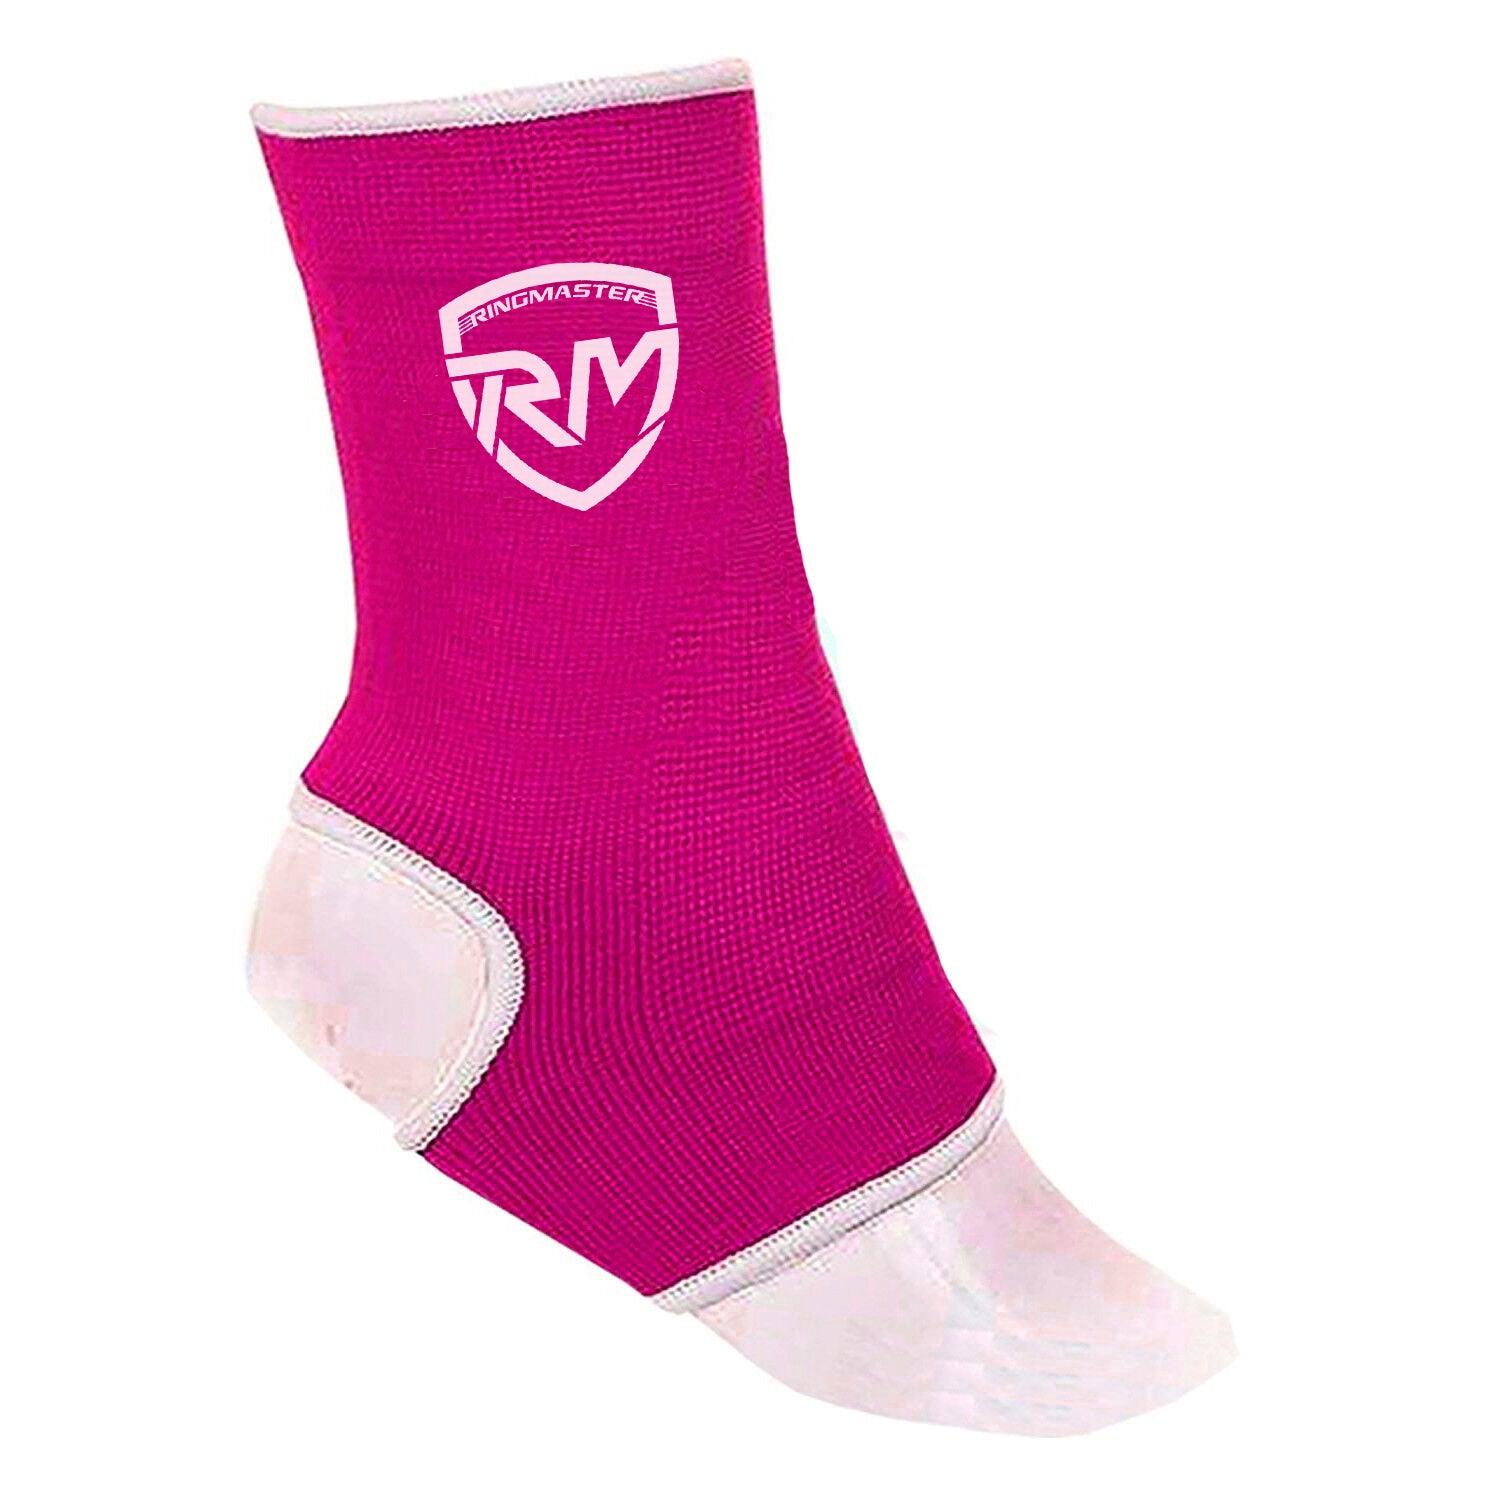 RingMaster Sports Ankle Support X Series One Size Pink - RINGMASTER SPORTS - Made For Champions